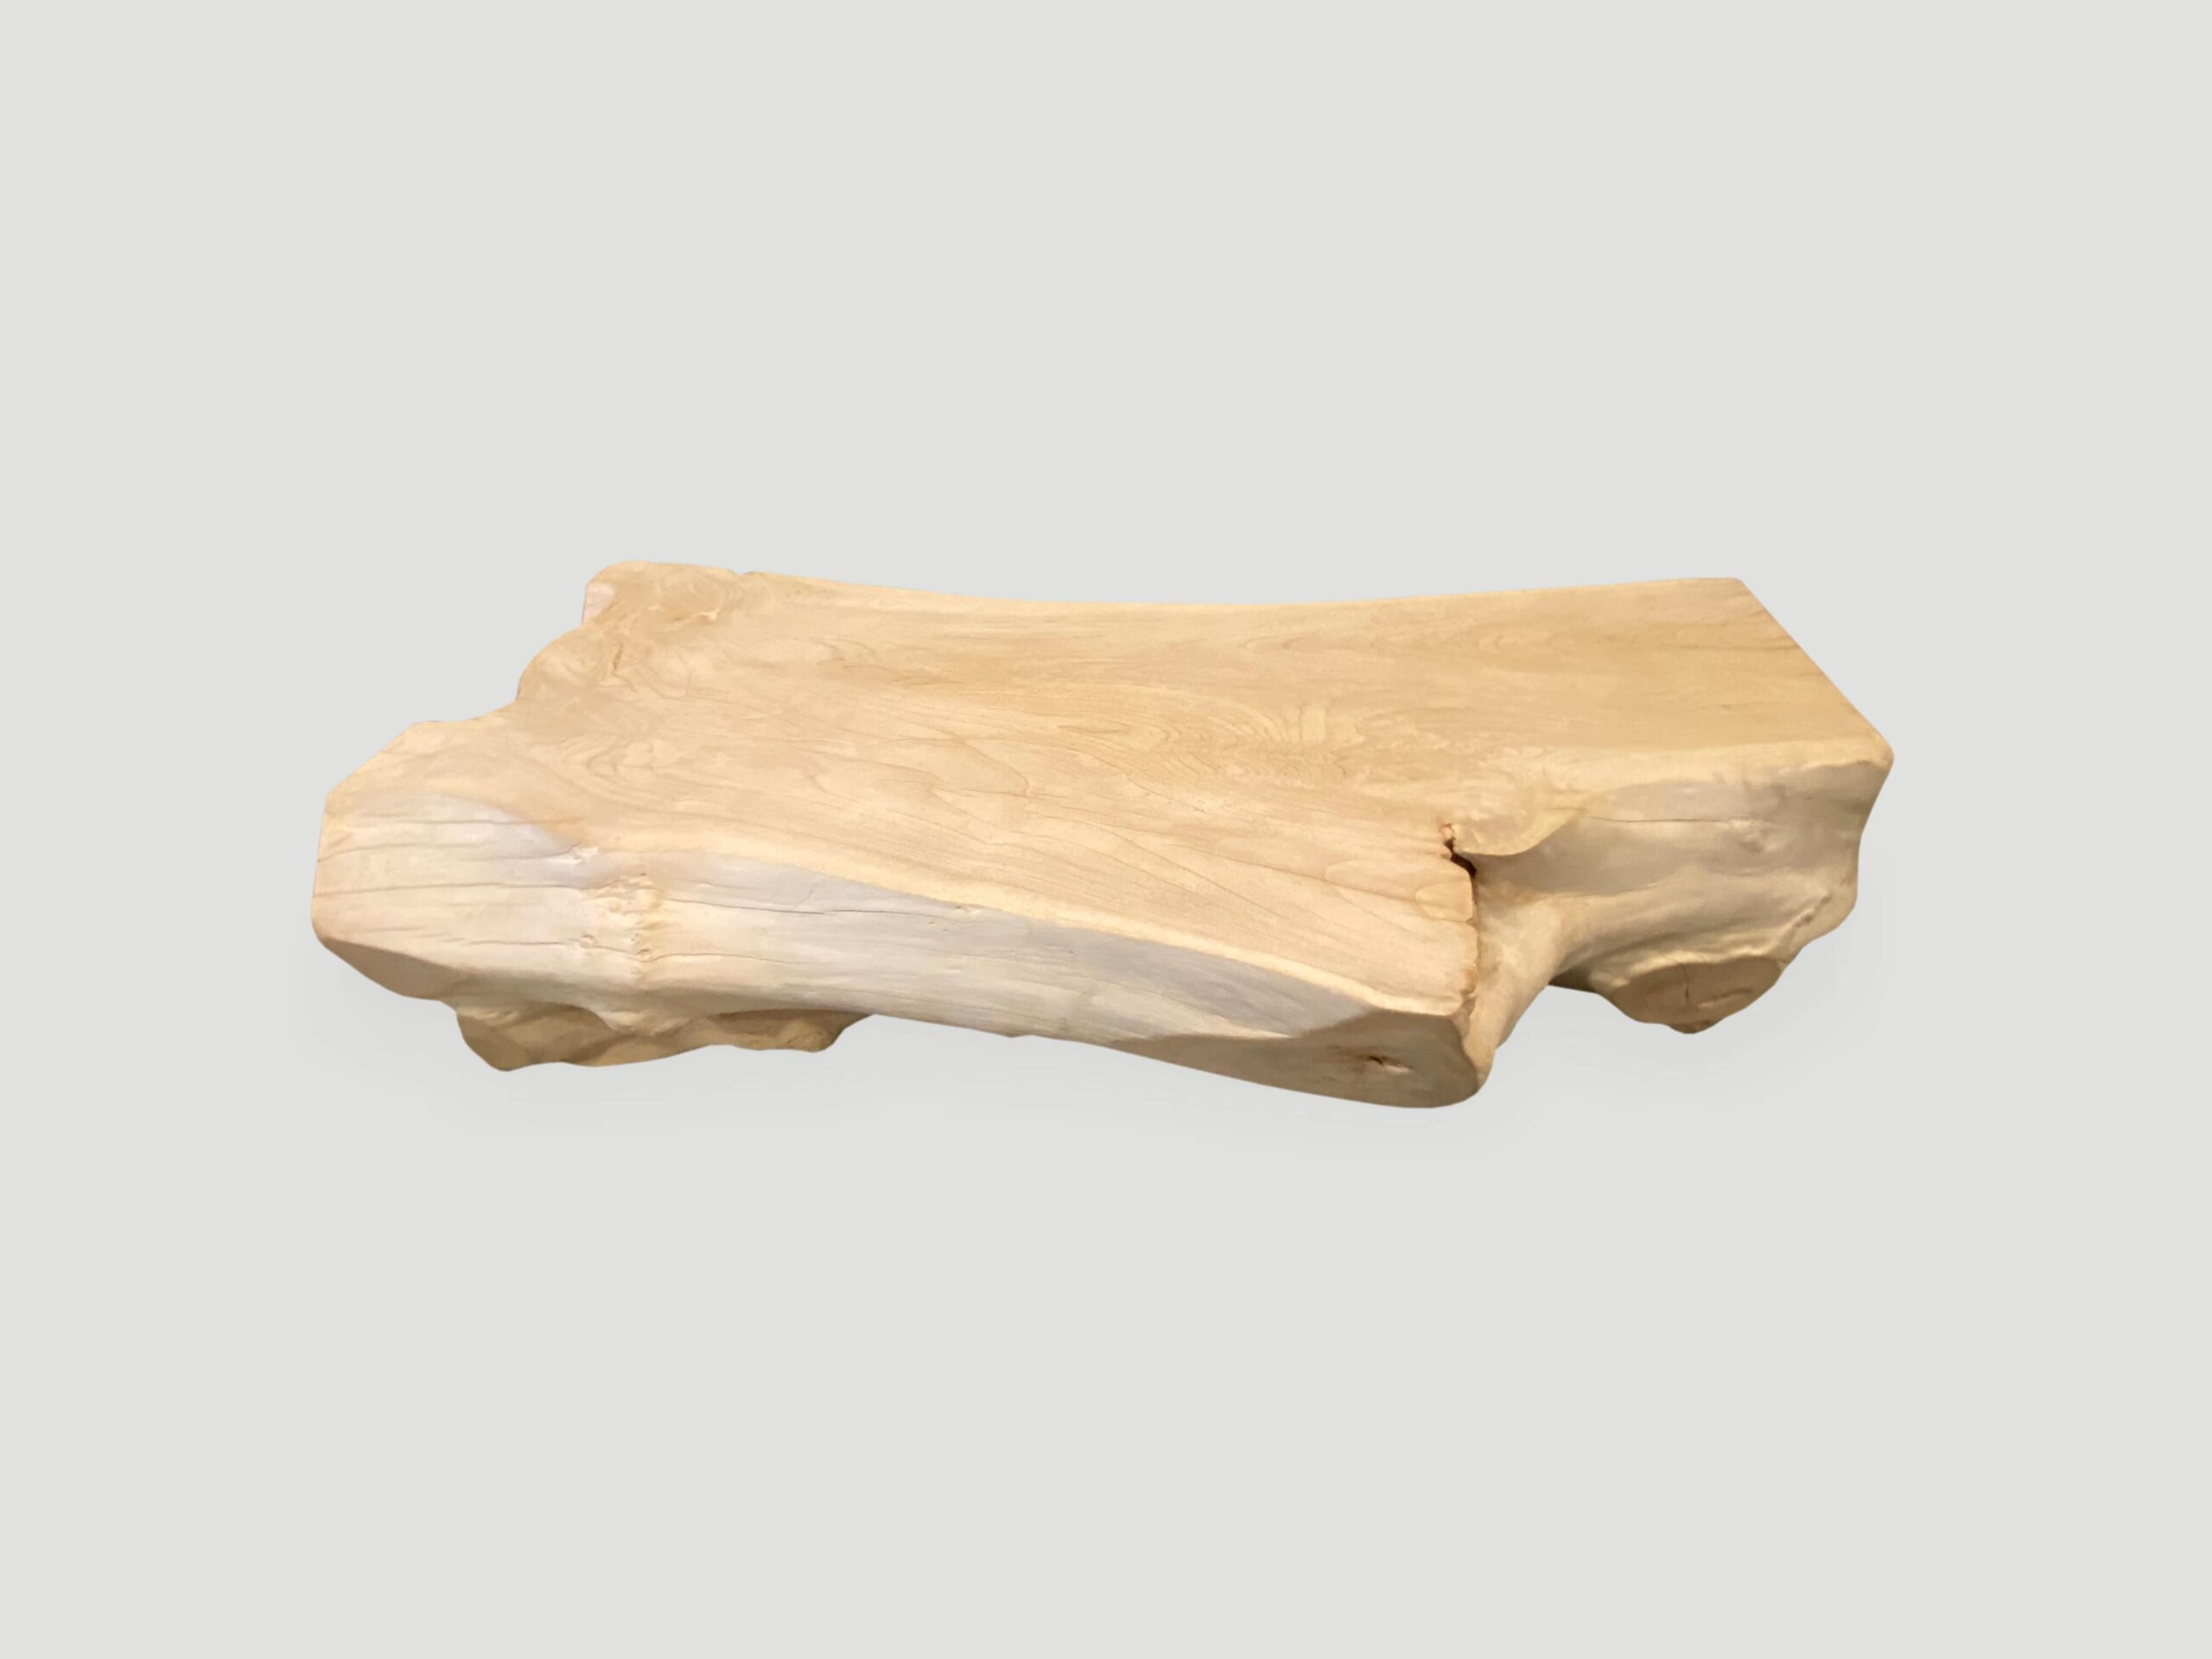 single slab coffee table or bench made from a hundred year old reclaimed teak root